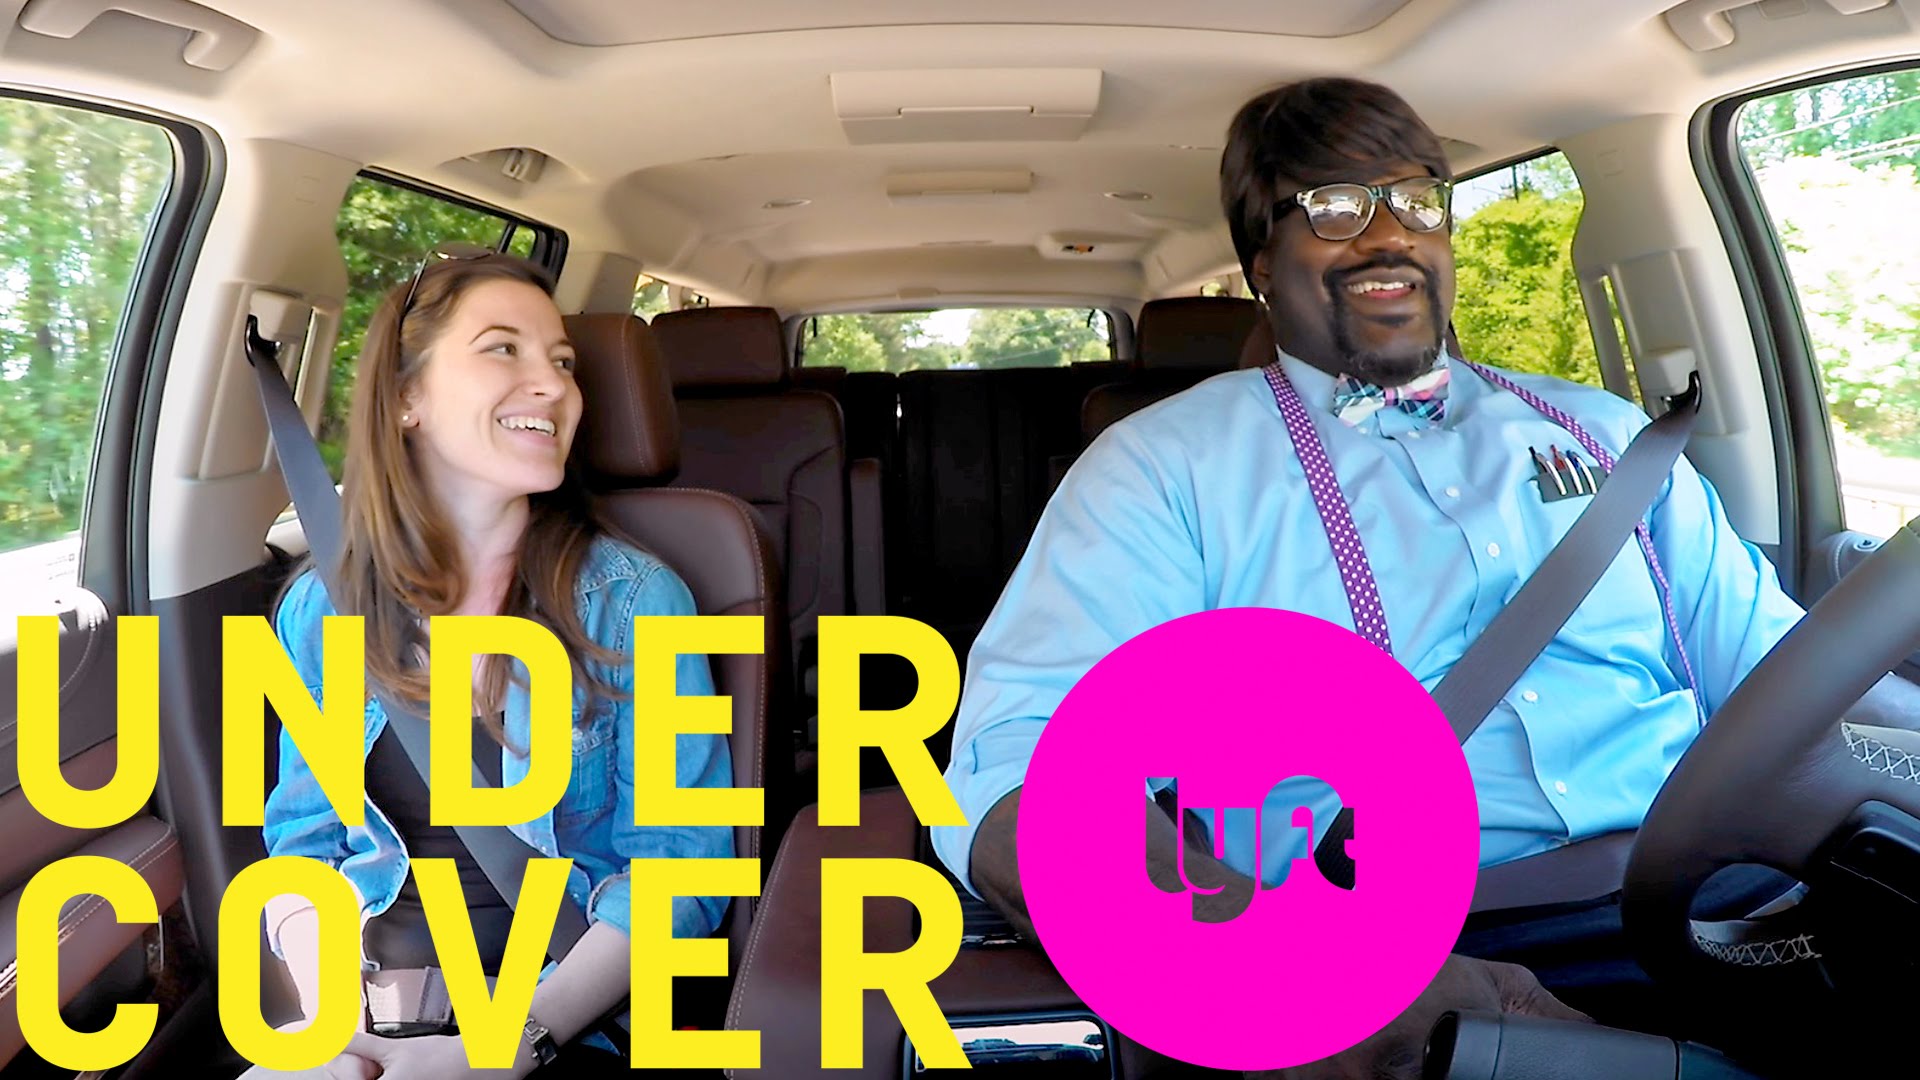 Shaquille O'Neal goes under cover driving with Lyft